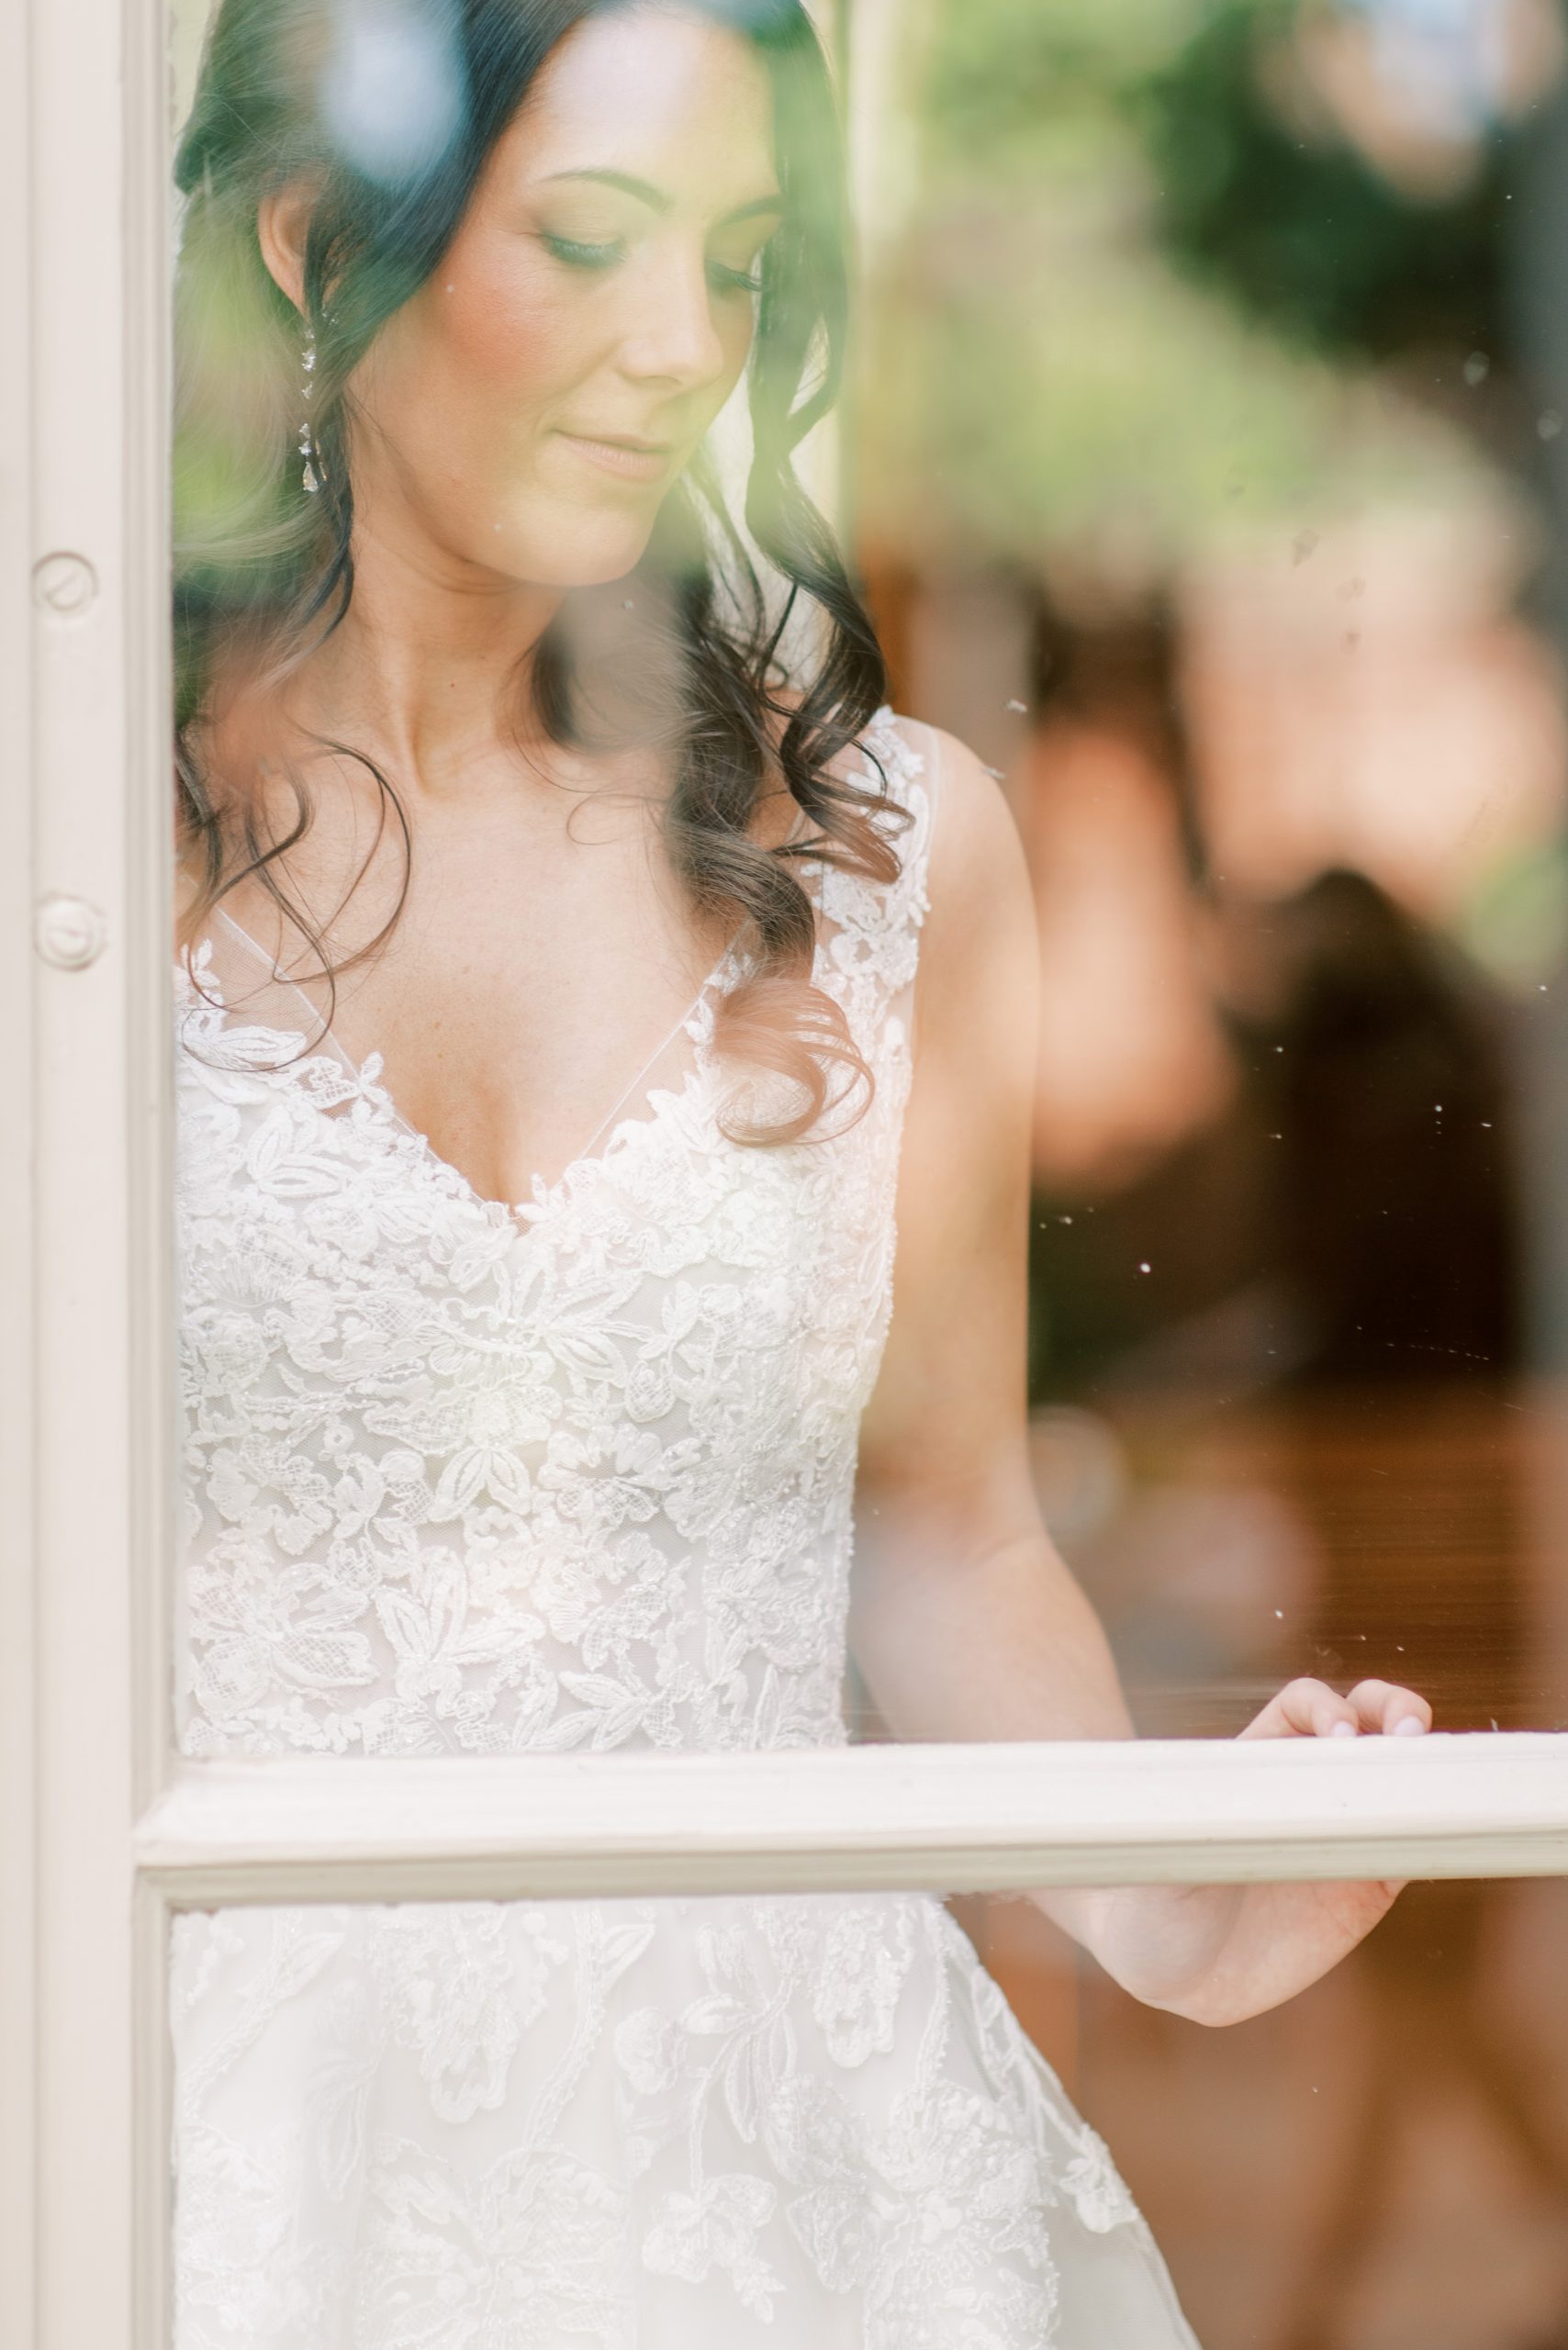 A beautiful spring Meridian House Wedding in Washington, DC photographed by film photographer Alicia Lacey.